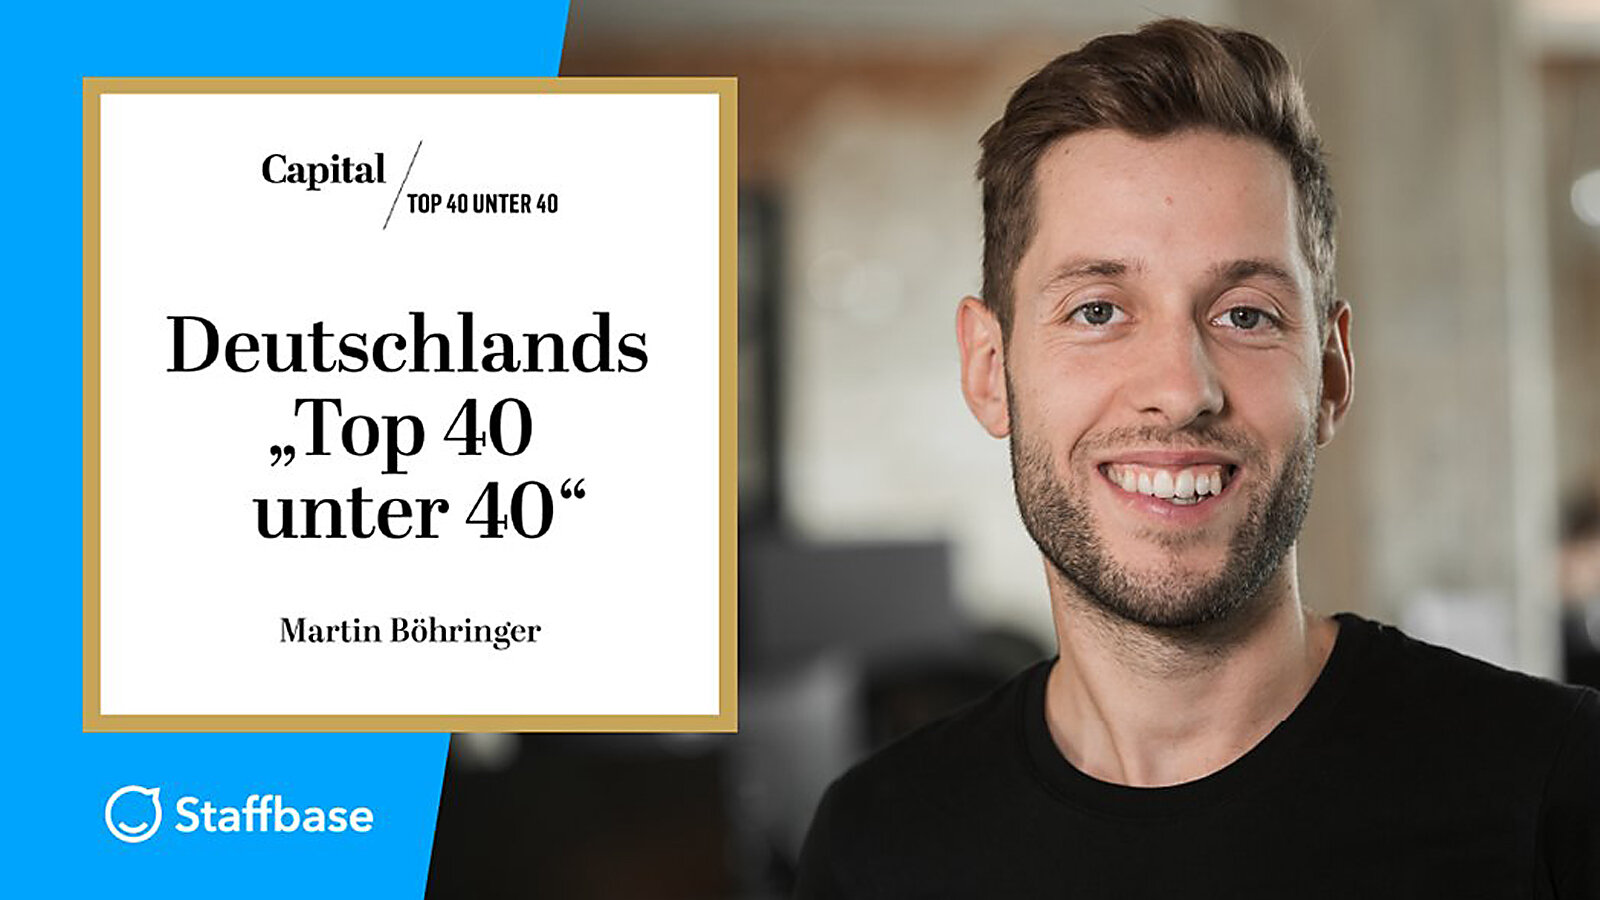 A young man smiles. Germany's top 40 under 40 is written in a speech bubble.